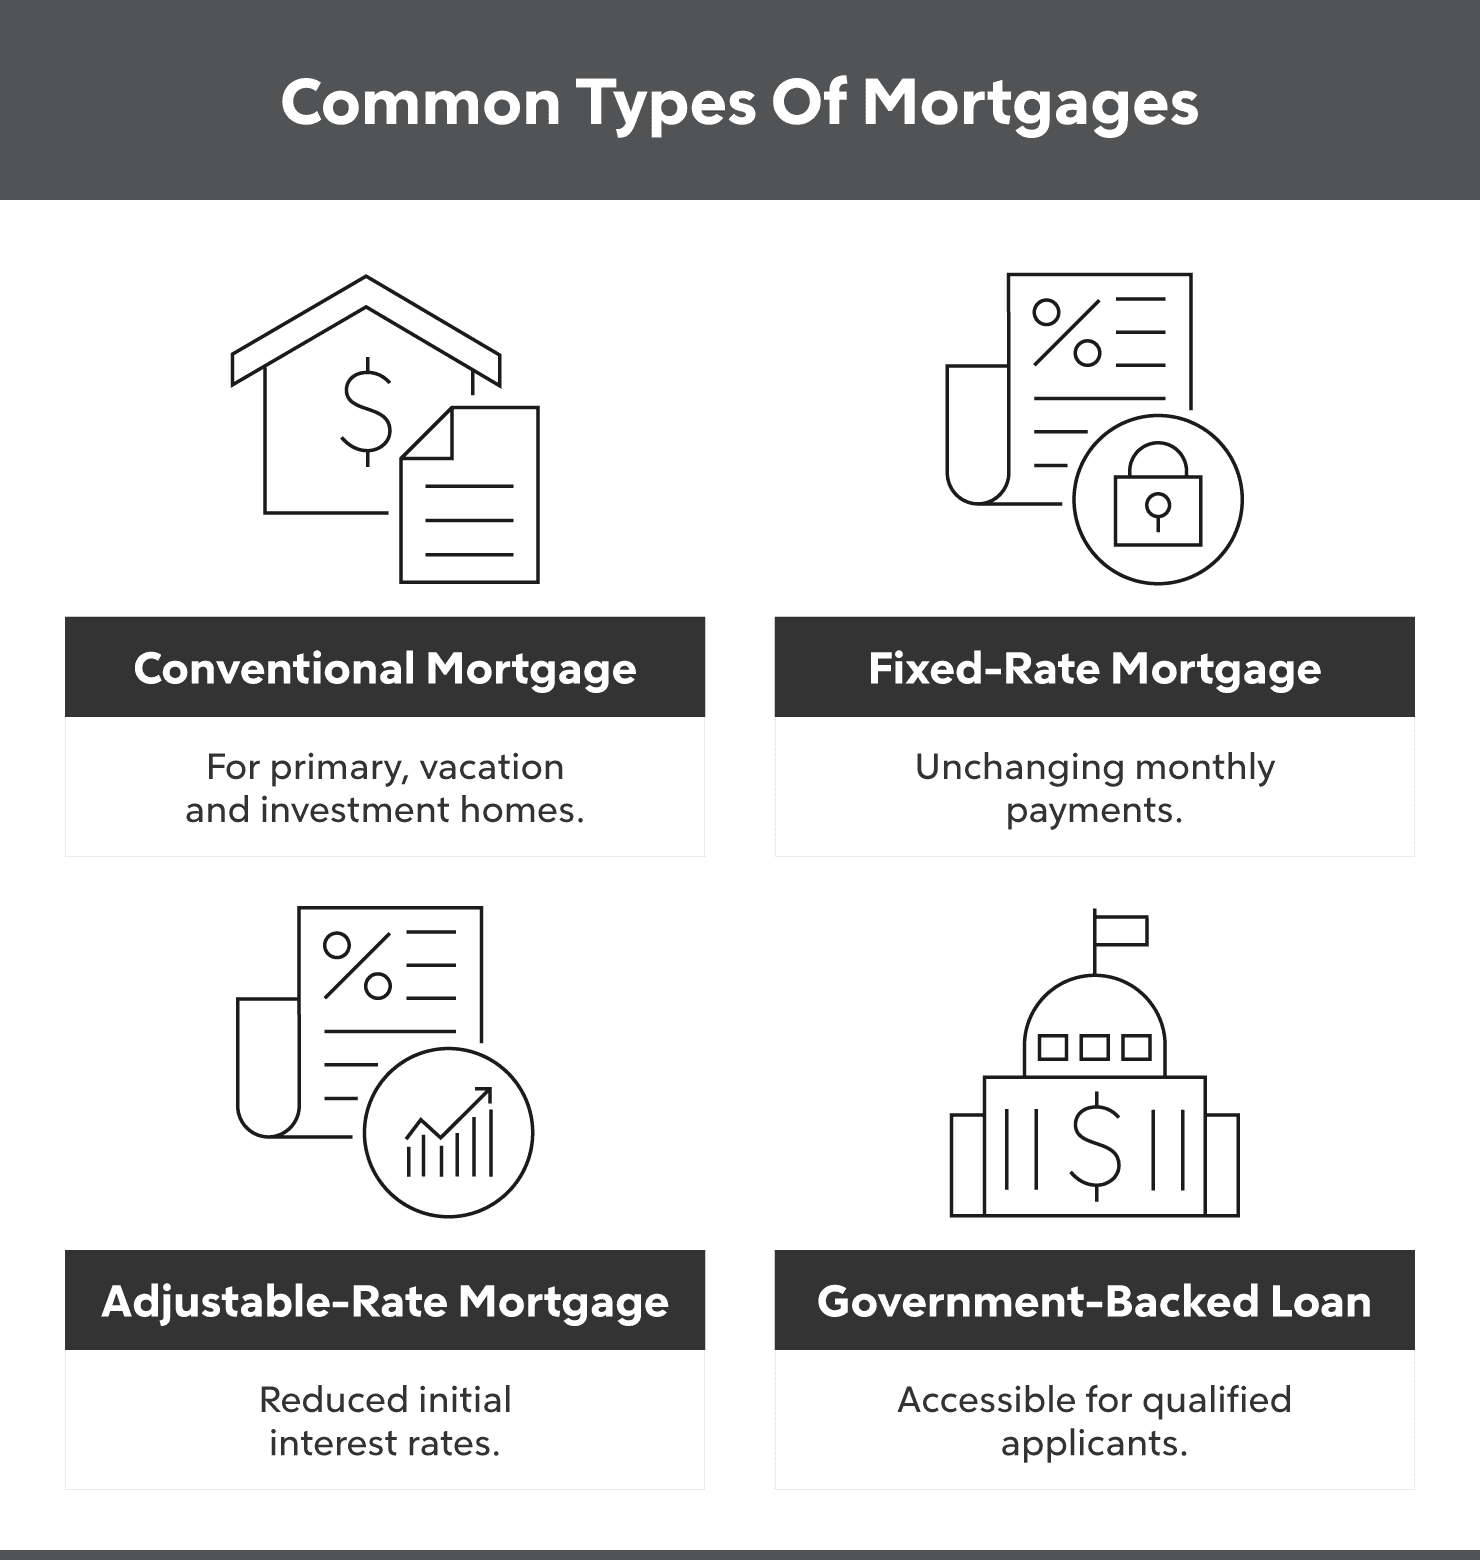 Common mortgage types are conventional mortgages, fixed rate mortgages, adjustable rate mortgages and government backed loans